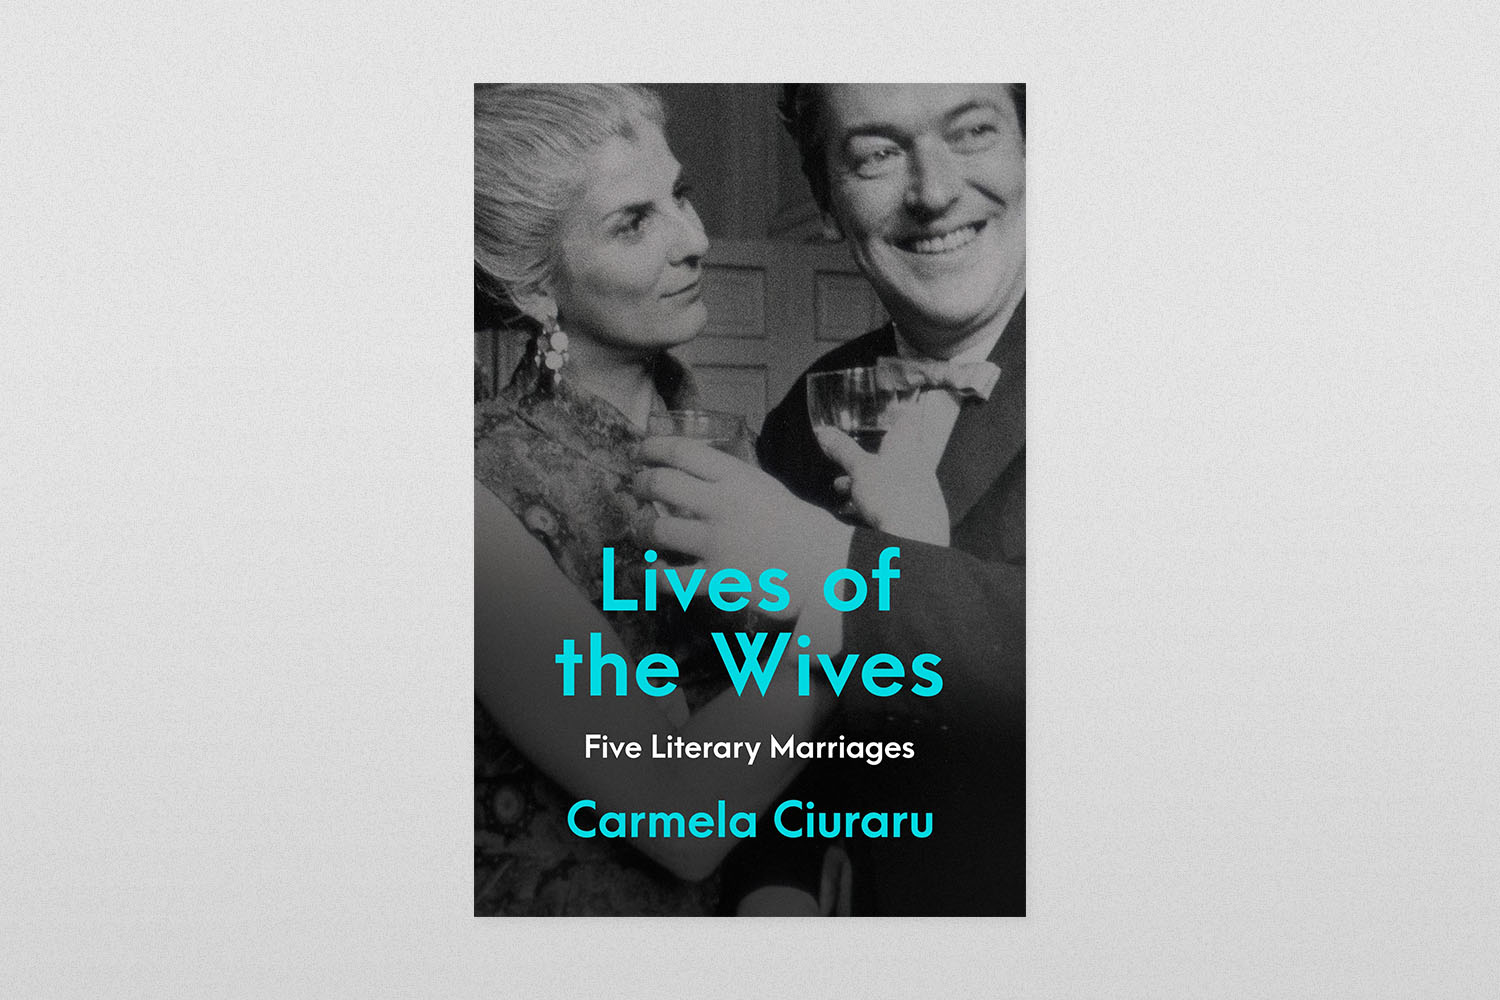 Lives of the Wives- Five Literary Marriages by Carmela Ciuraru